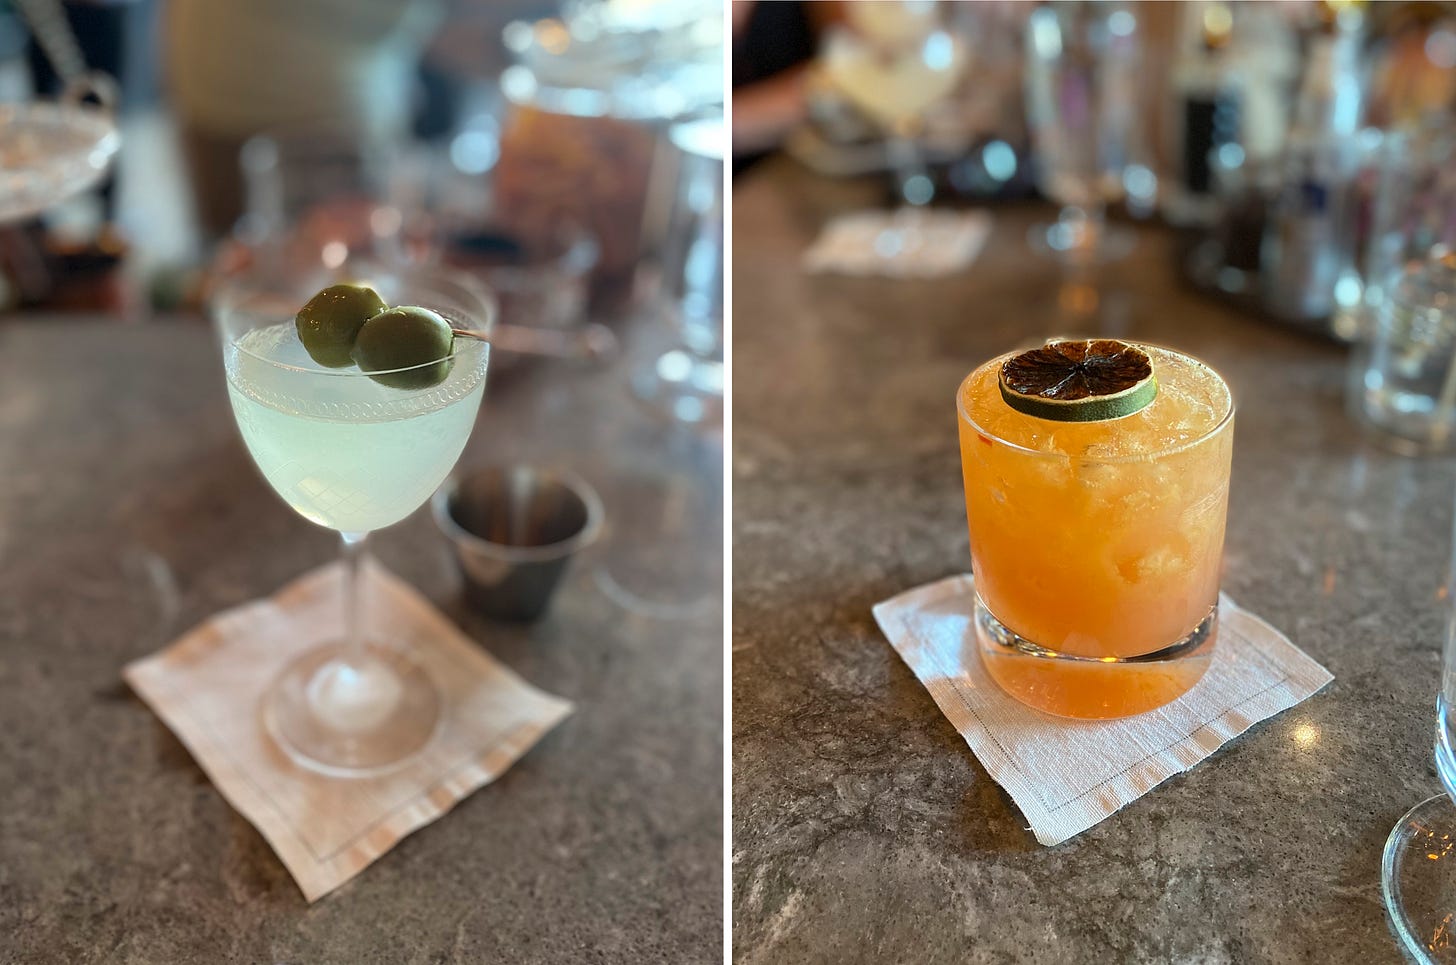 Left image: a dirty martini in a Nick-and-Nora glass with etched designs, two green olives on a metal toothpick across the top. Right image: a yellow-orange cocktail in a rocks glass over crushed ice, with a dried lime resting on top. Both sit on square, rustic canvas napkins.